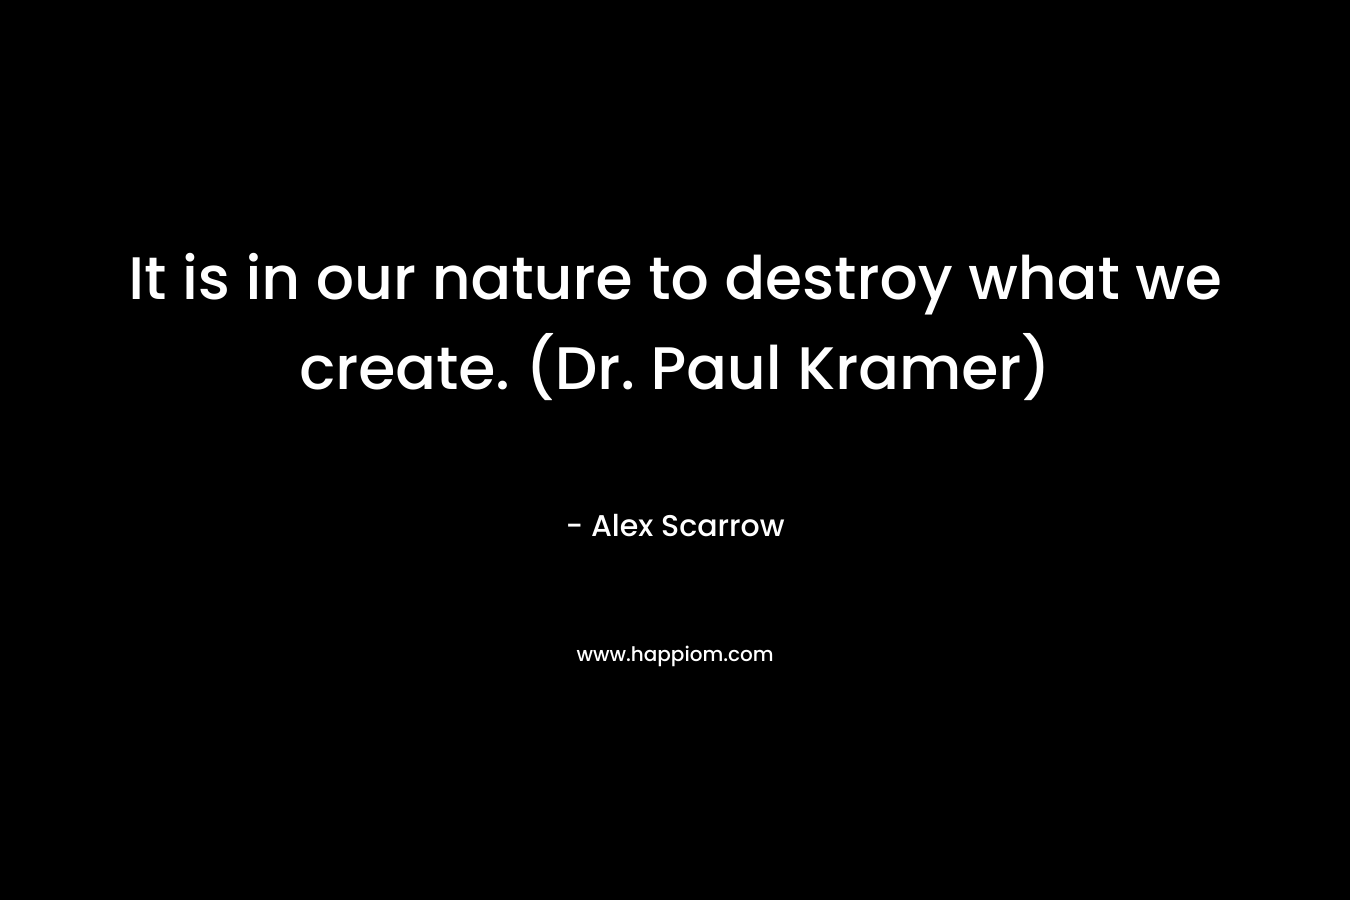 It is in our nature to destroy what we create. (Dr. Paul Kramer) – Alex Scarrow